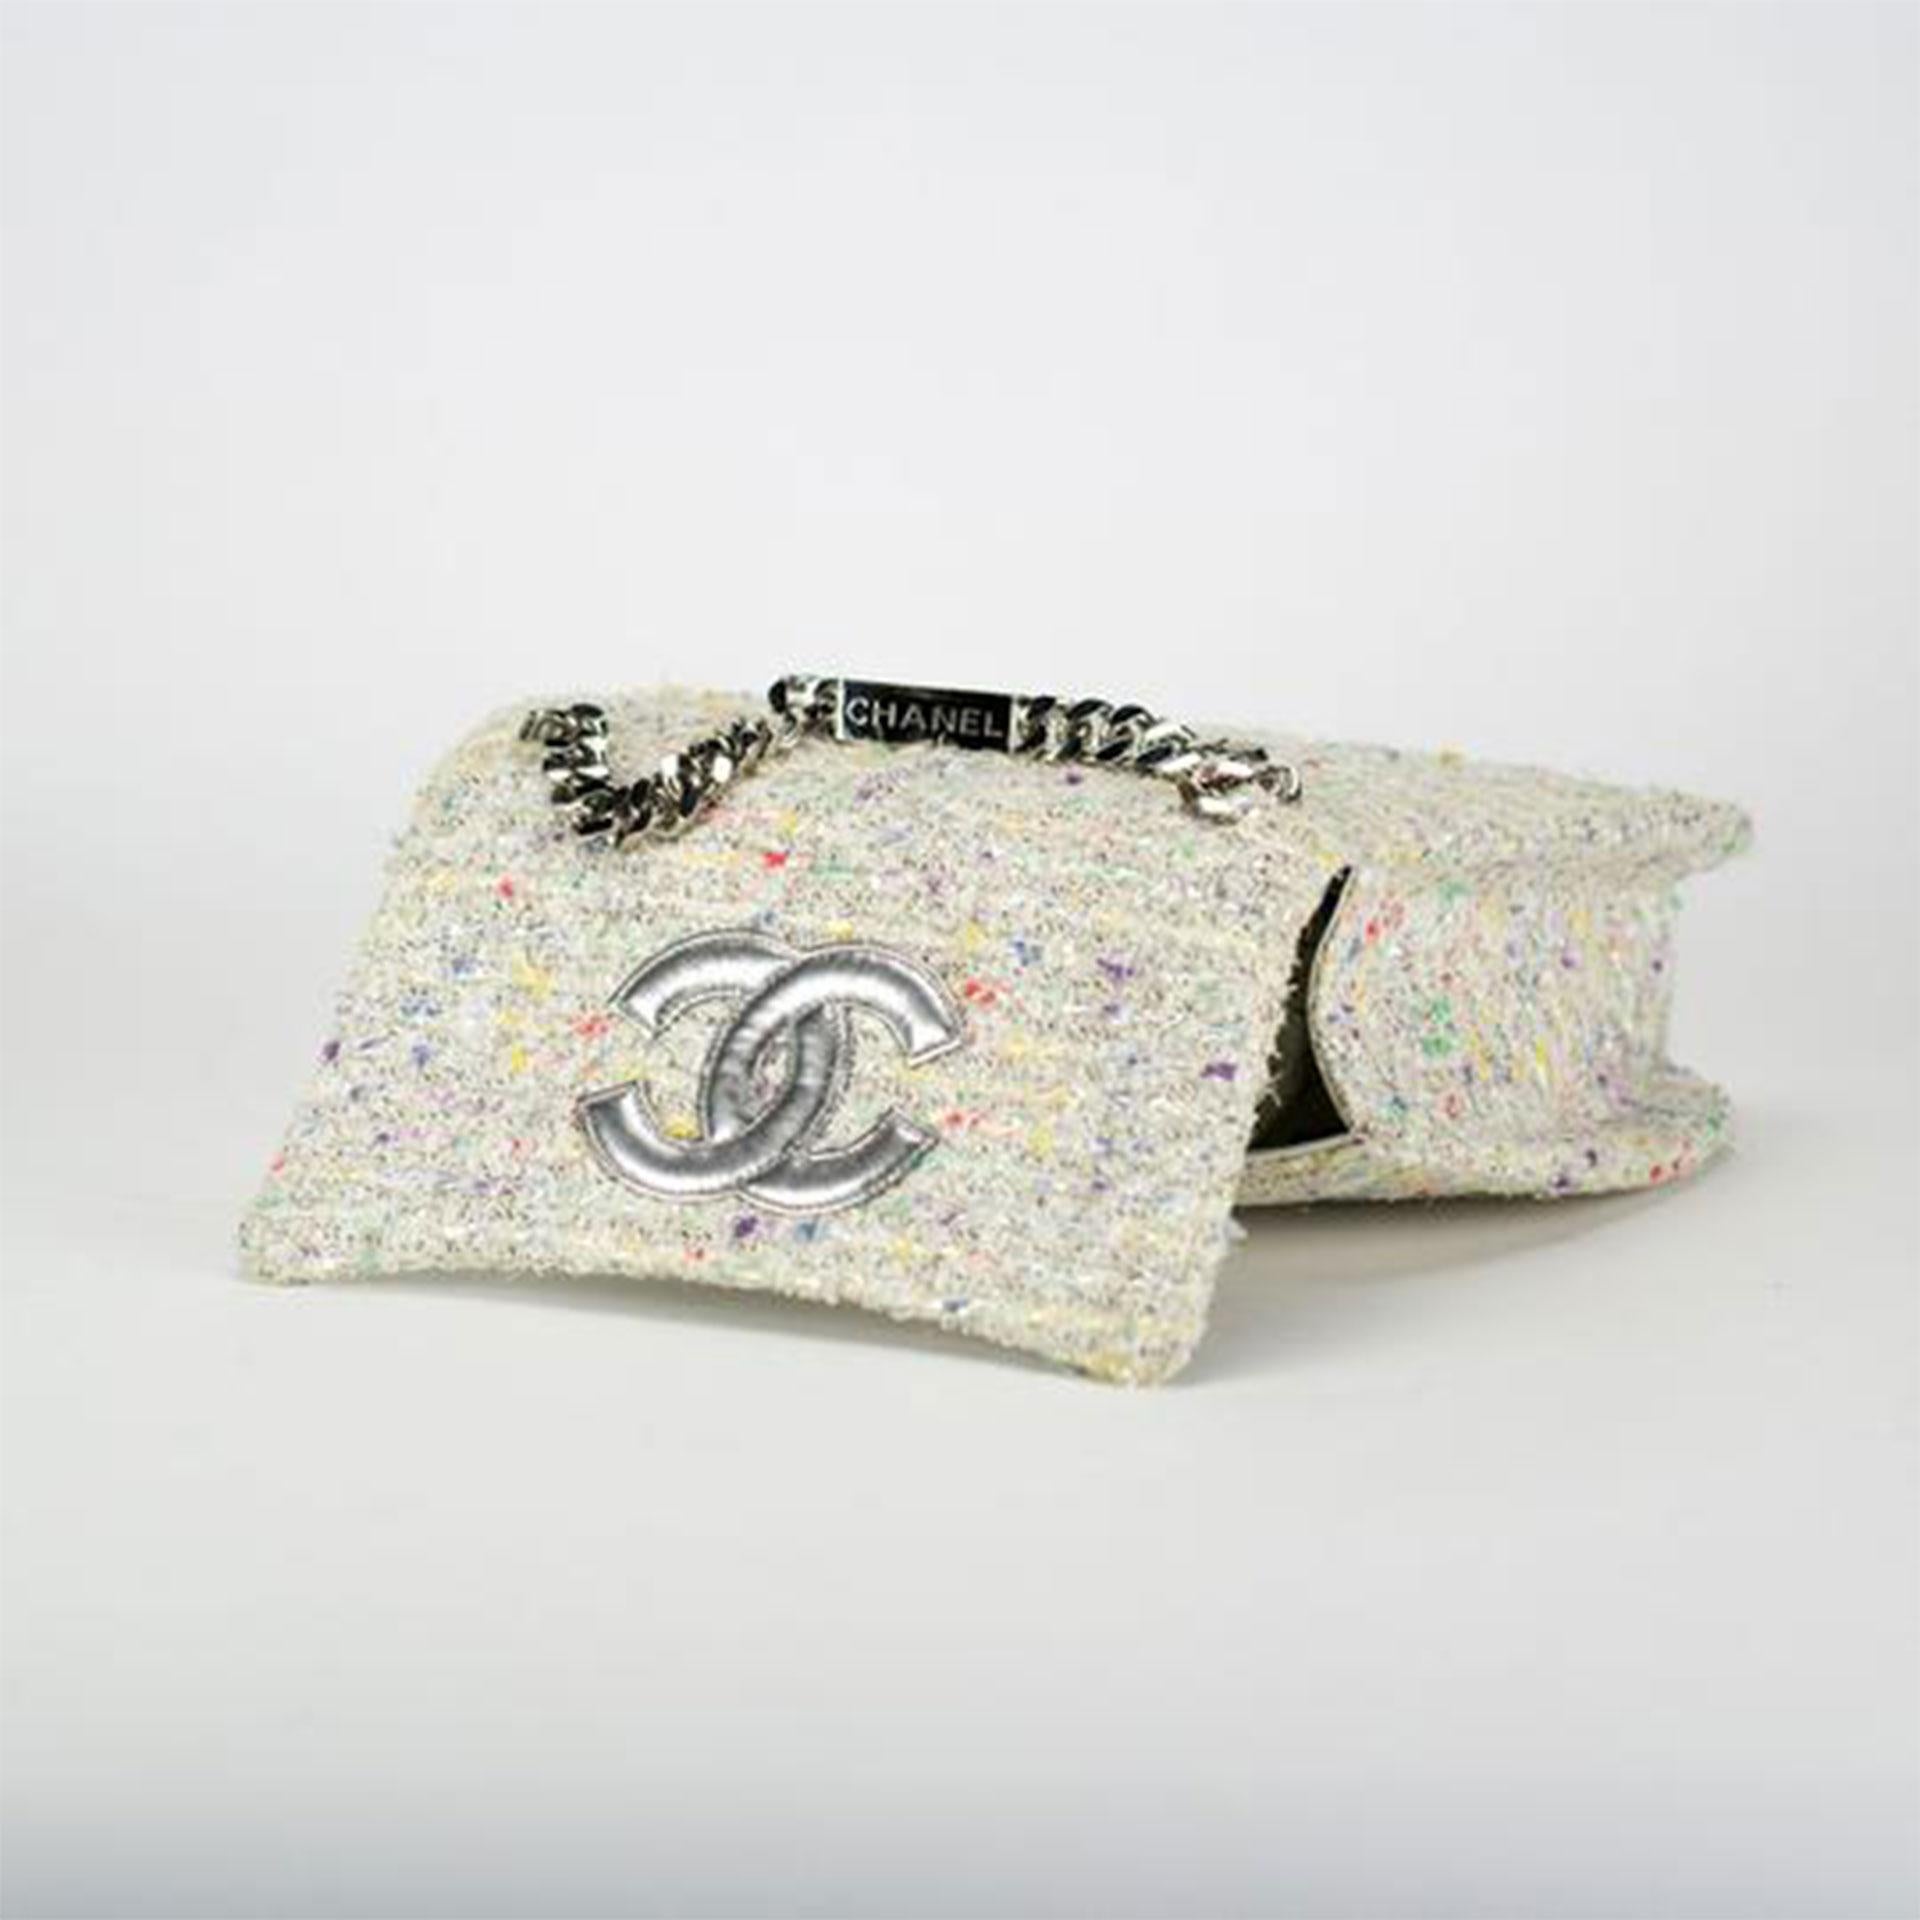 Chanel confetti tweed flap with large CC logo and name plate chain

1996 {VINTAGE 26 Years}
Silver hardware
Interior center zipper pocket
Additional center pocket
Interior white lambskin lining
Magnetic closure
10